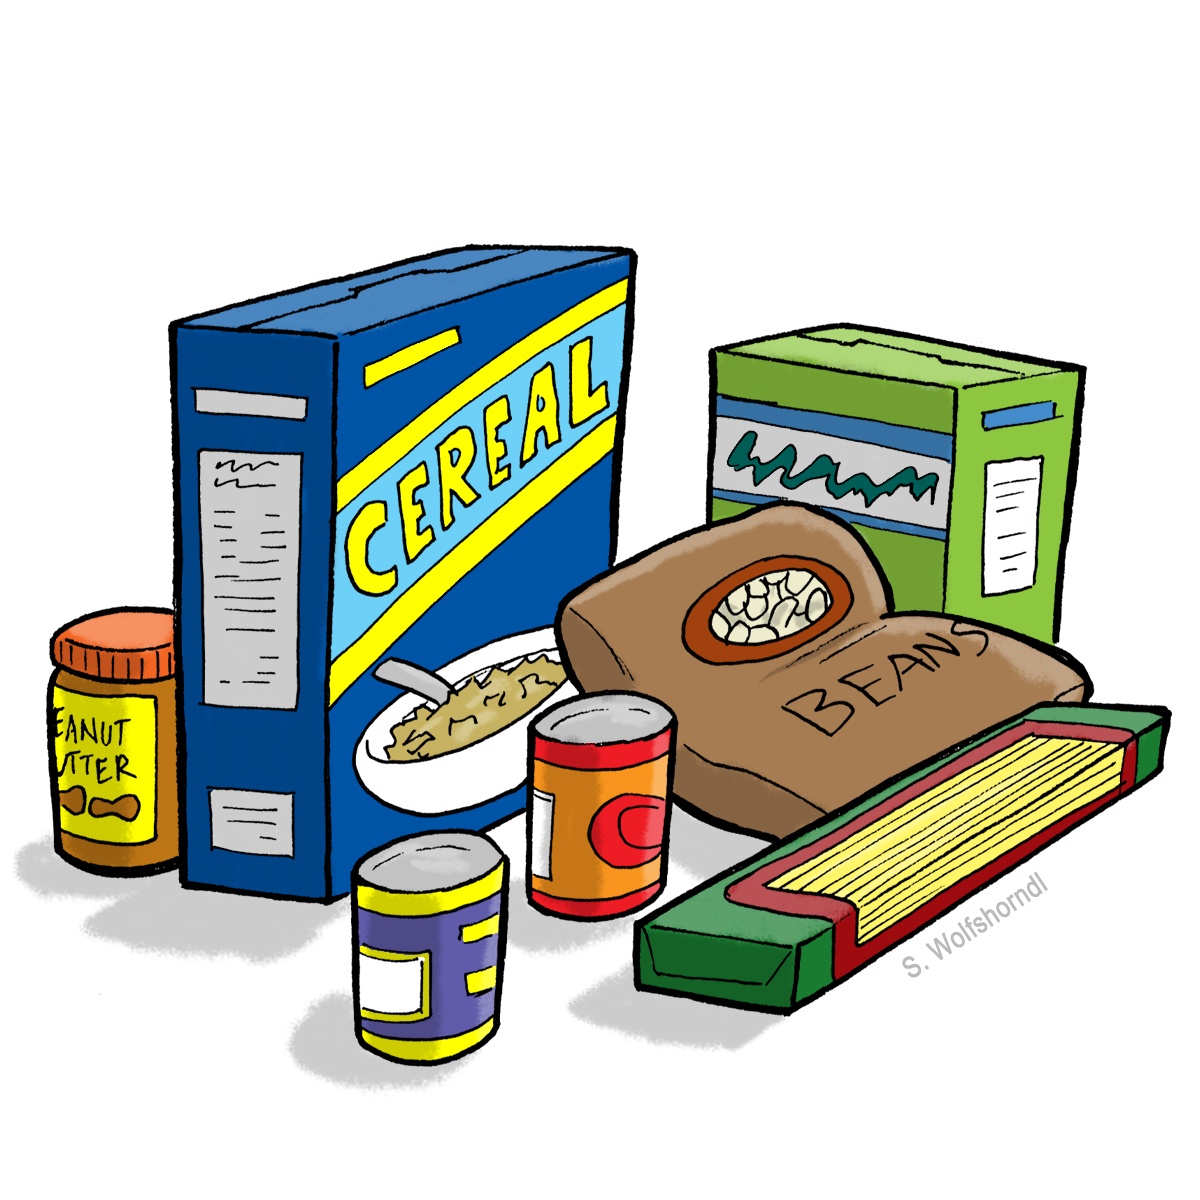 Food Pantry Clipart - ClipArt Best